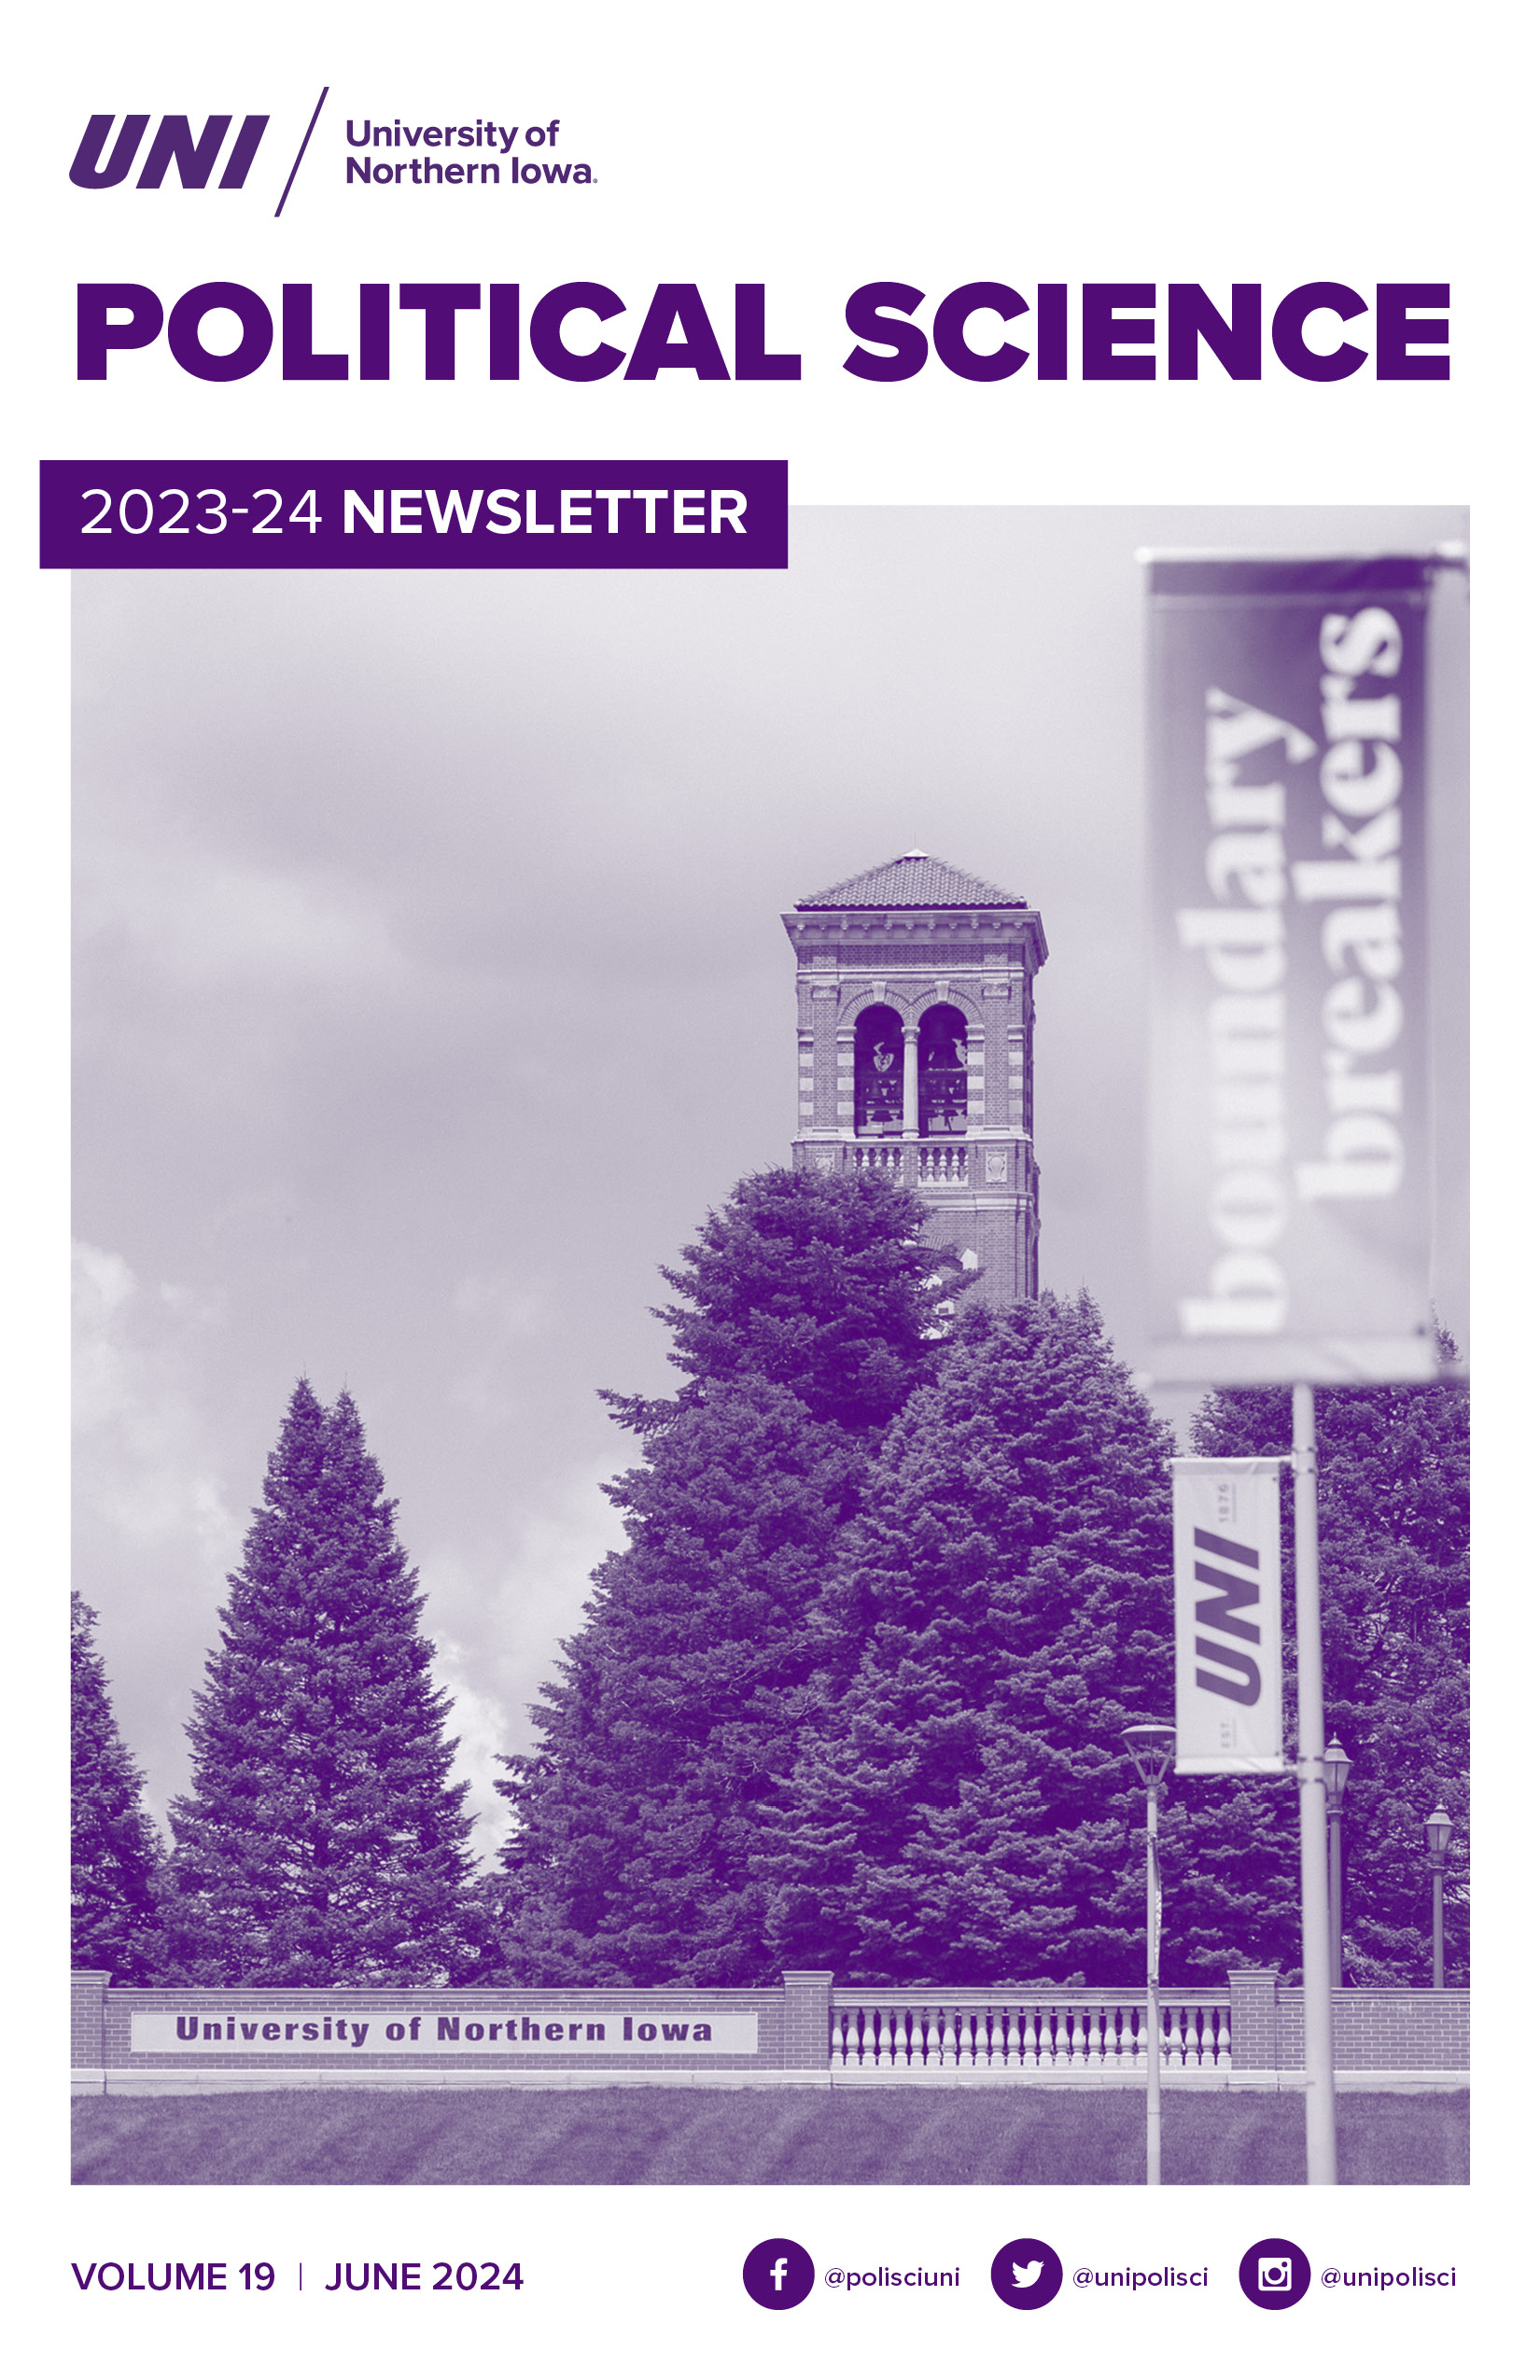 Cover of the Political Science Newsletter,  photo of campanile with University of Northern Iowa wall and banners in the foreground